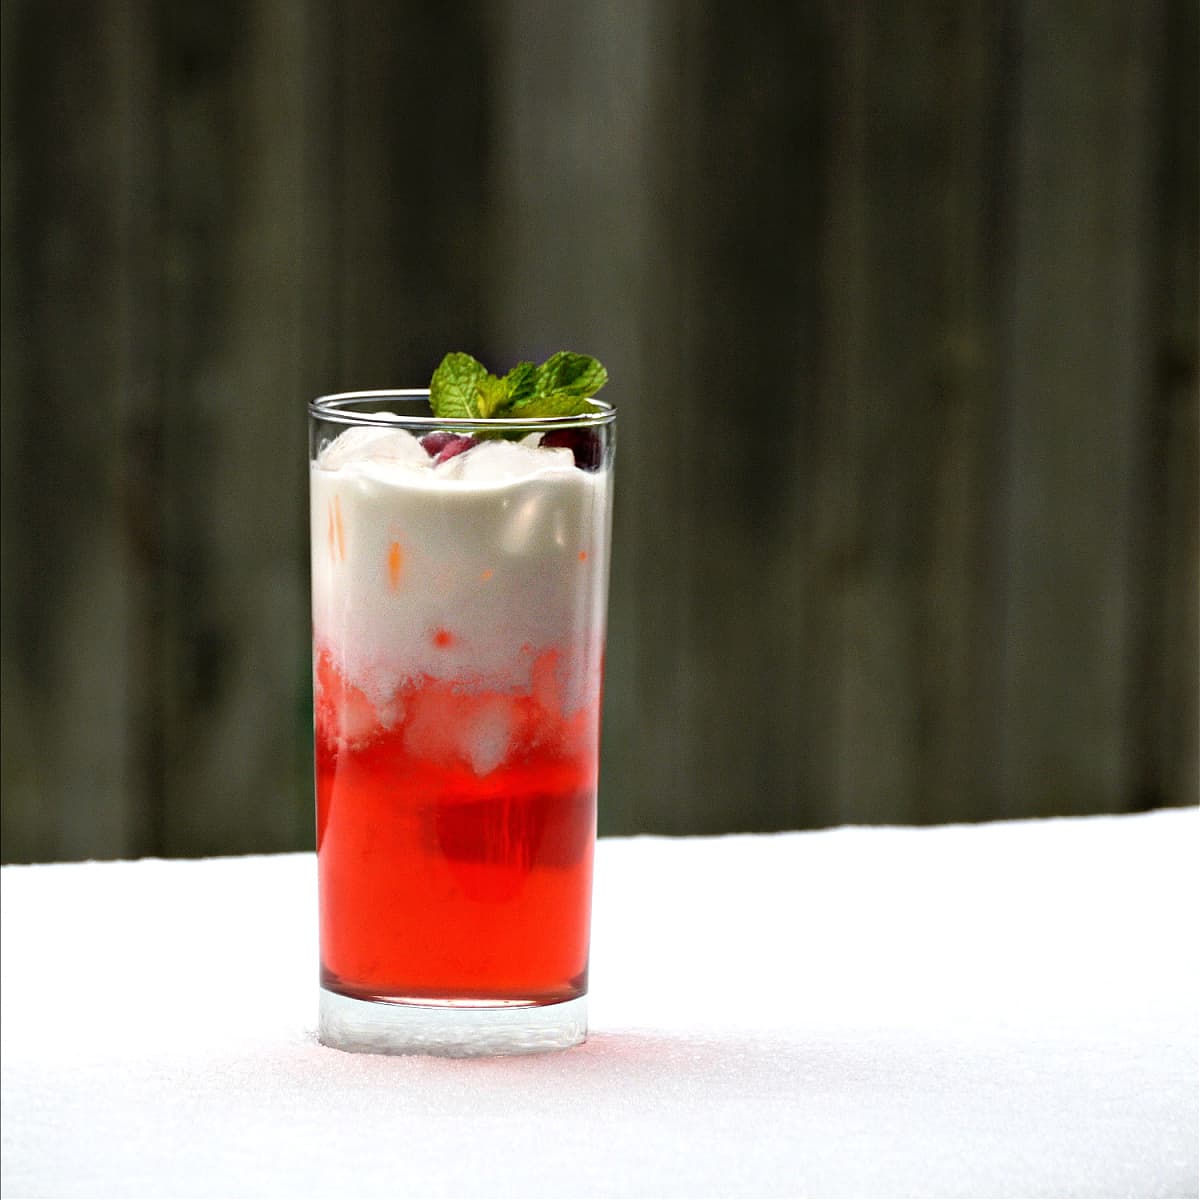 Tall glass in the snow, filled with a bi-colored beverage: white on top, and red on the bottom.